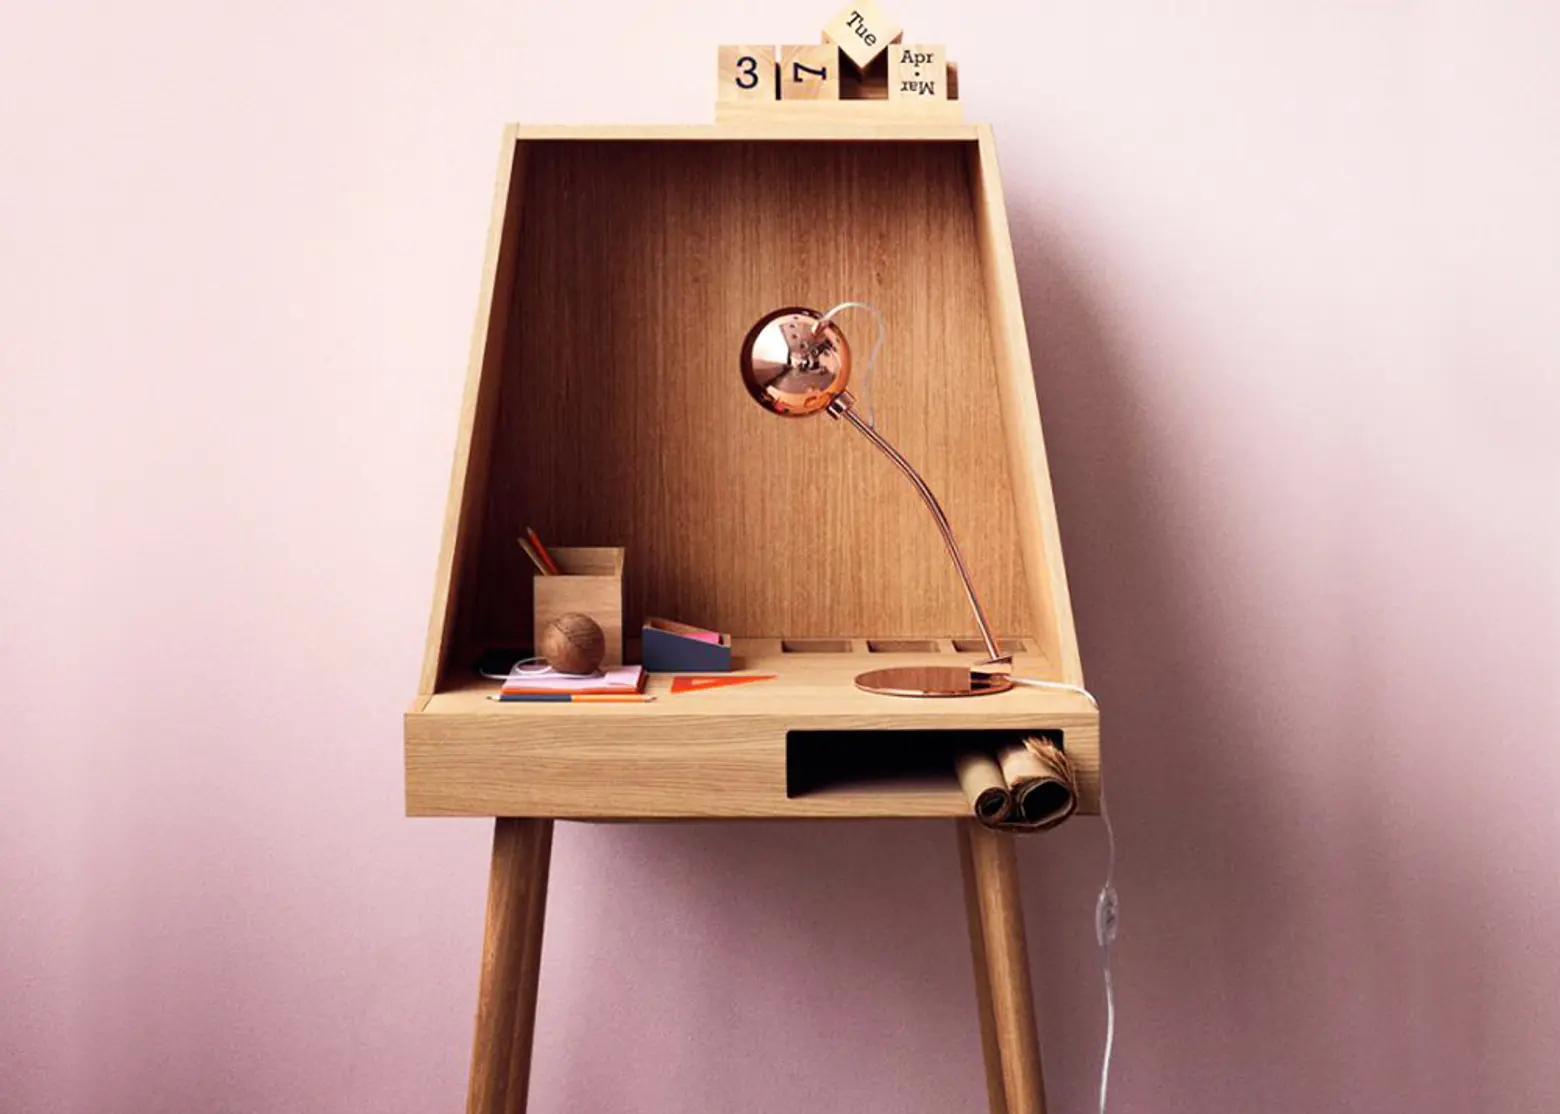 Kristina Kjær’s Wooden Desk is a Sweet Modern Design That Also Saves Space